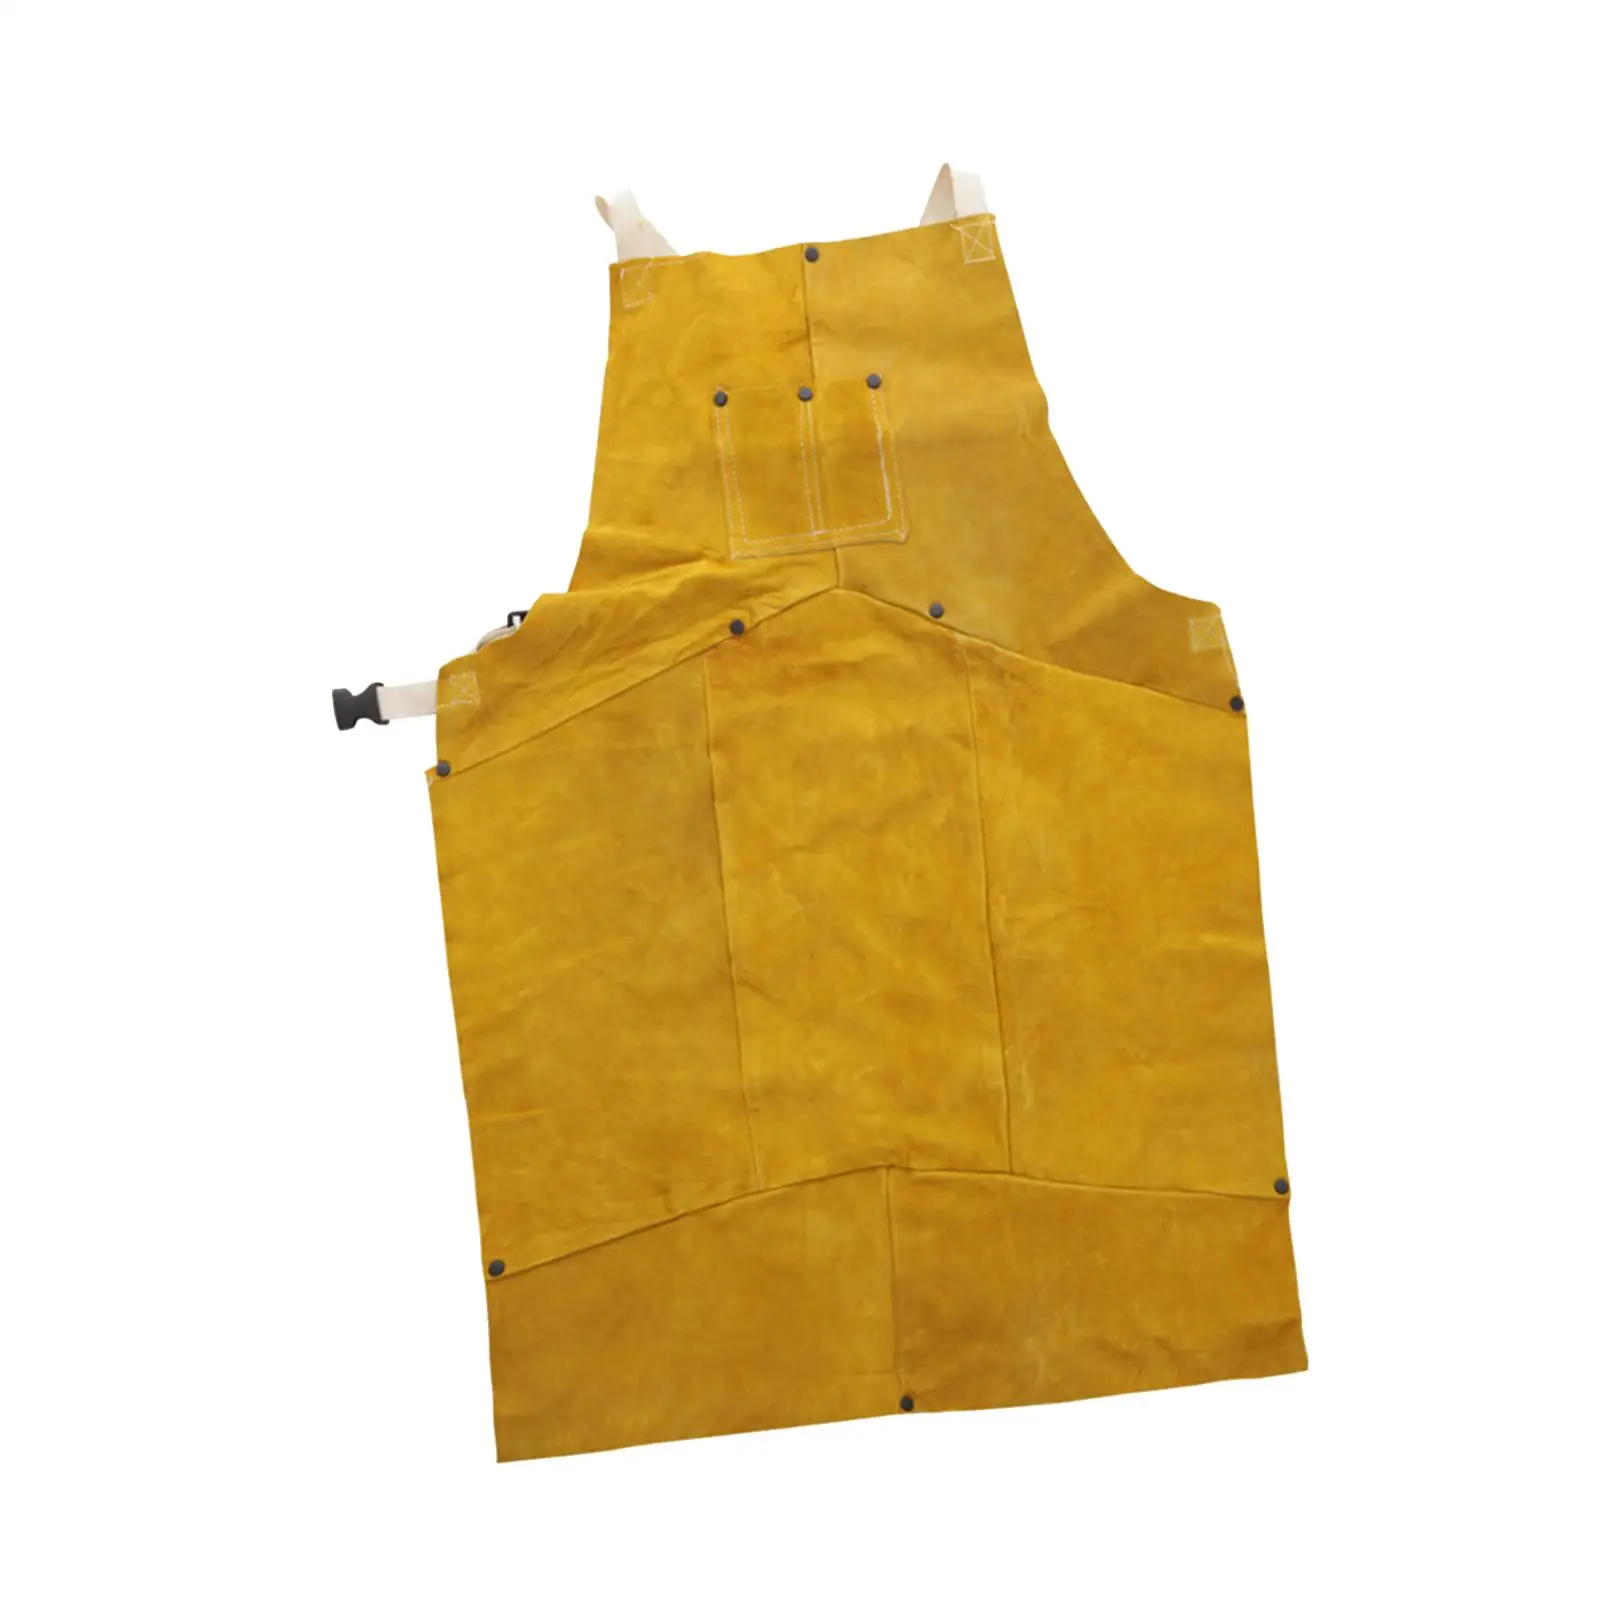 

Cowhide Welding Welder Apron Adjustable Welding Work Shop Apron for Welding Cooking BBQ Craft Baking Camping Hiking BBQ Barbecue